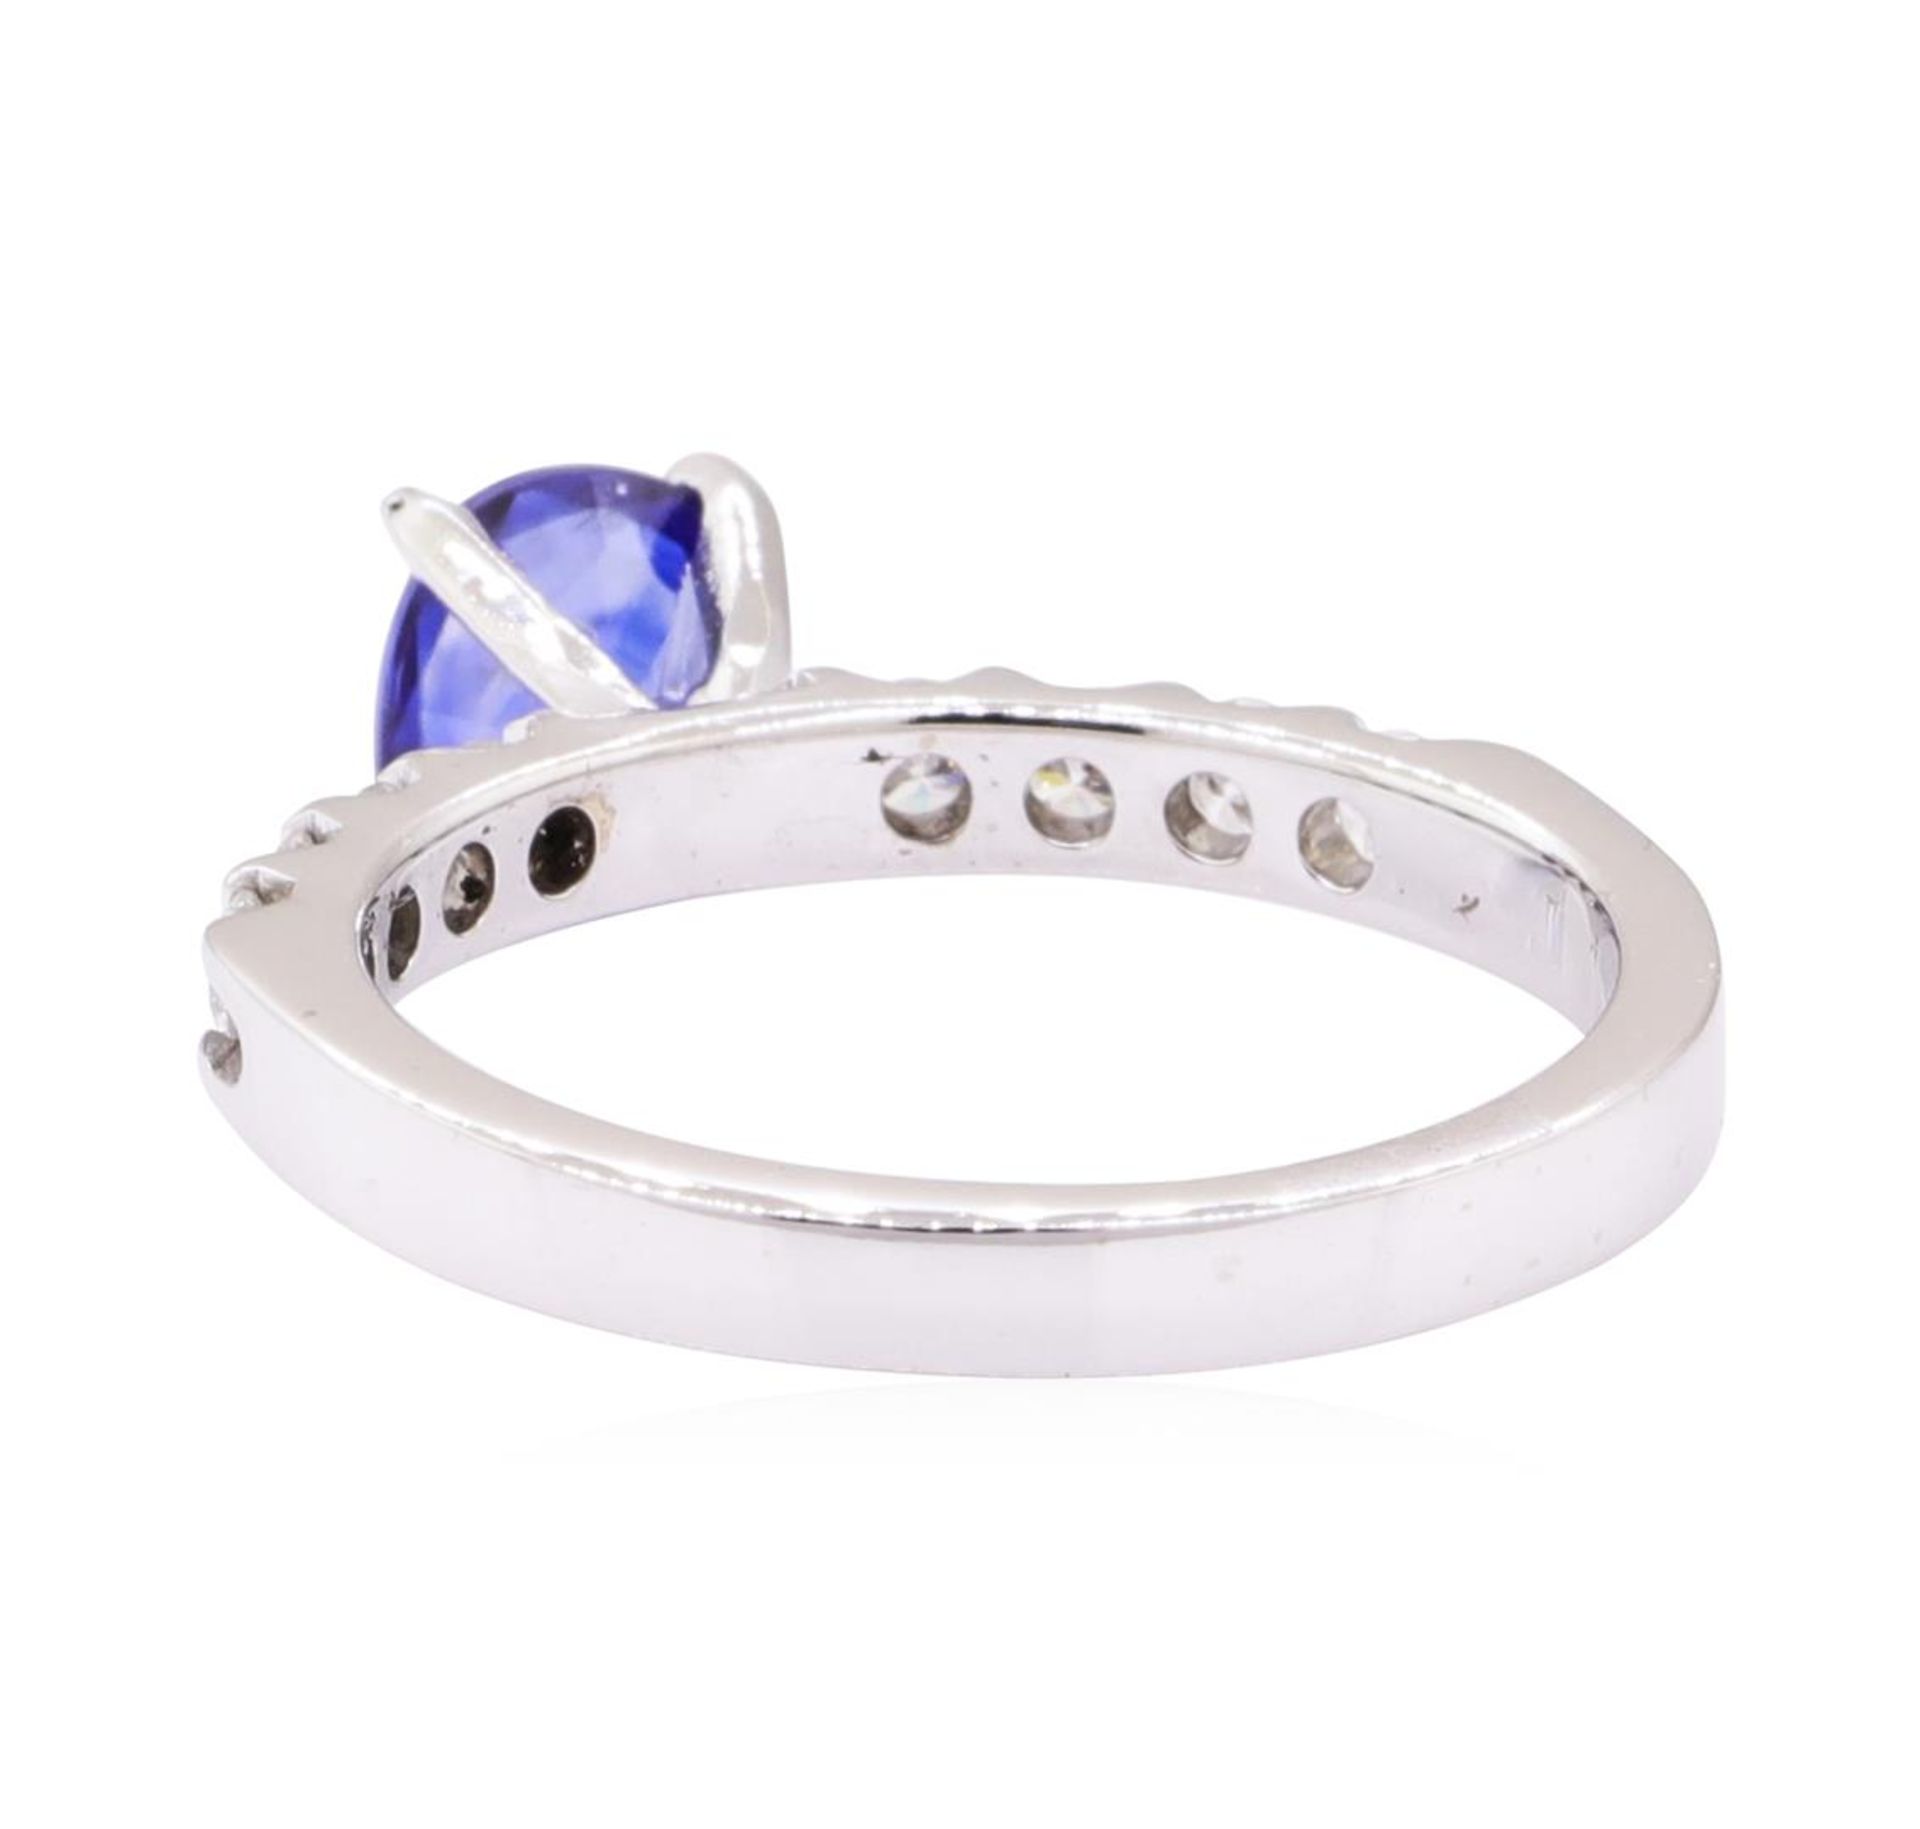 1.11 ctw Blue Sapphire and Diamond Ring - 14KT White Gold - Image 3 of 4